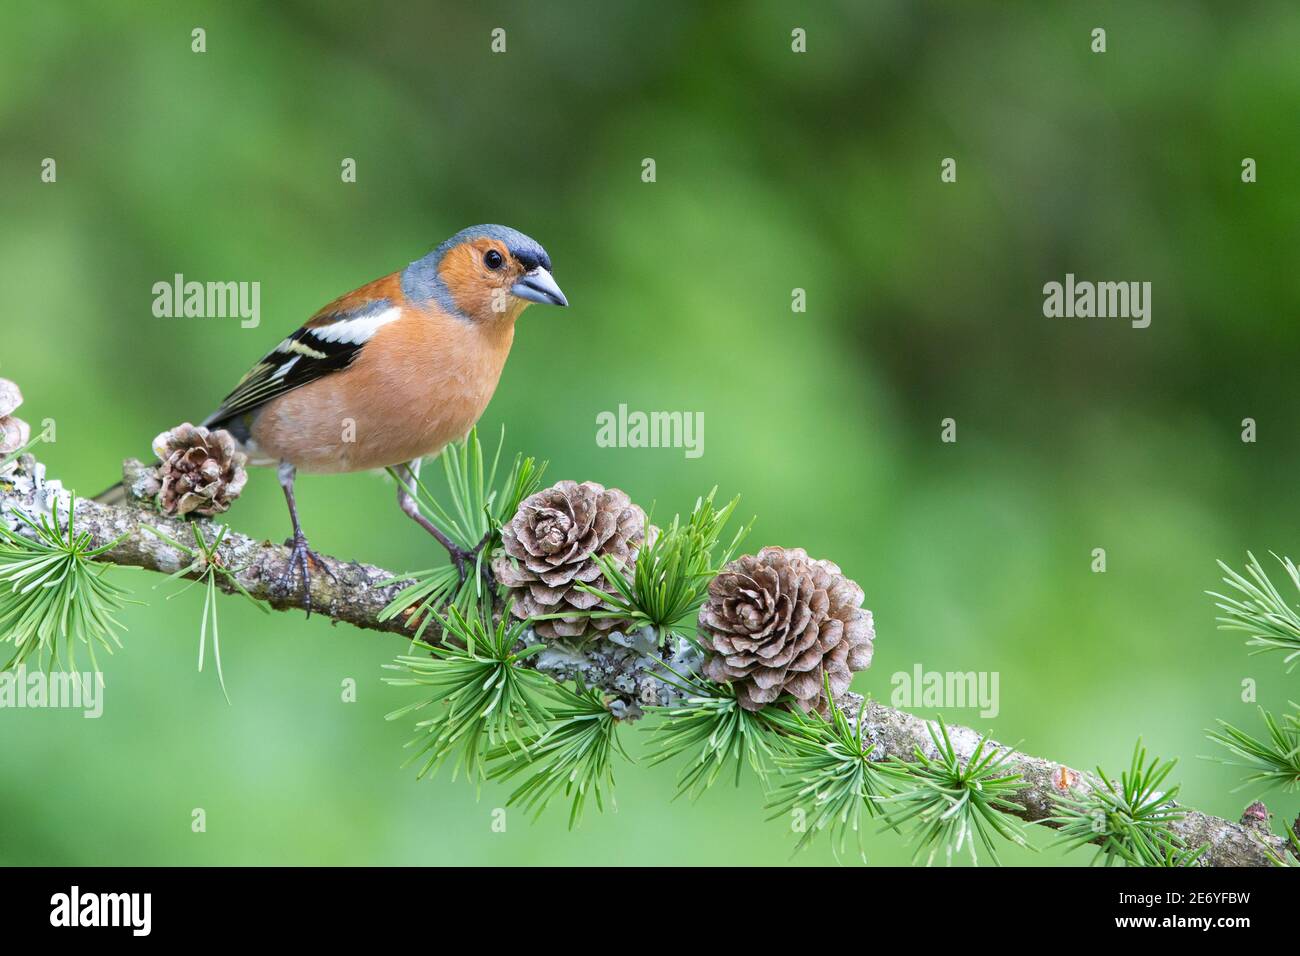 Male Chaffinch [ Fringilla coelebs ] on Larch branch with cones Stock Photo